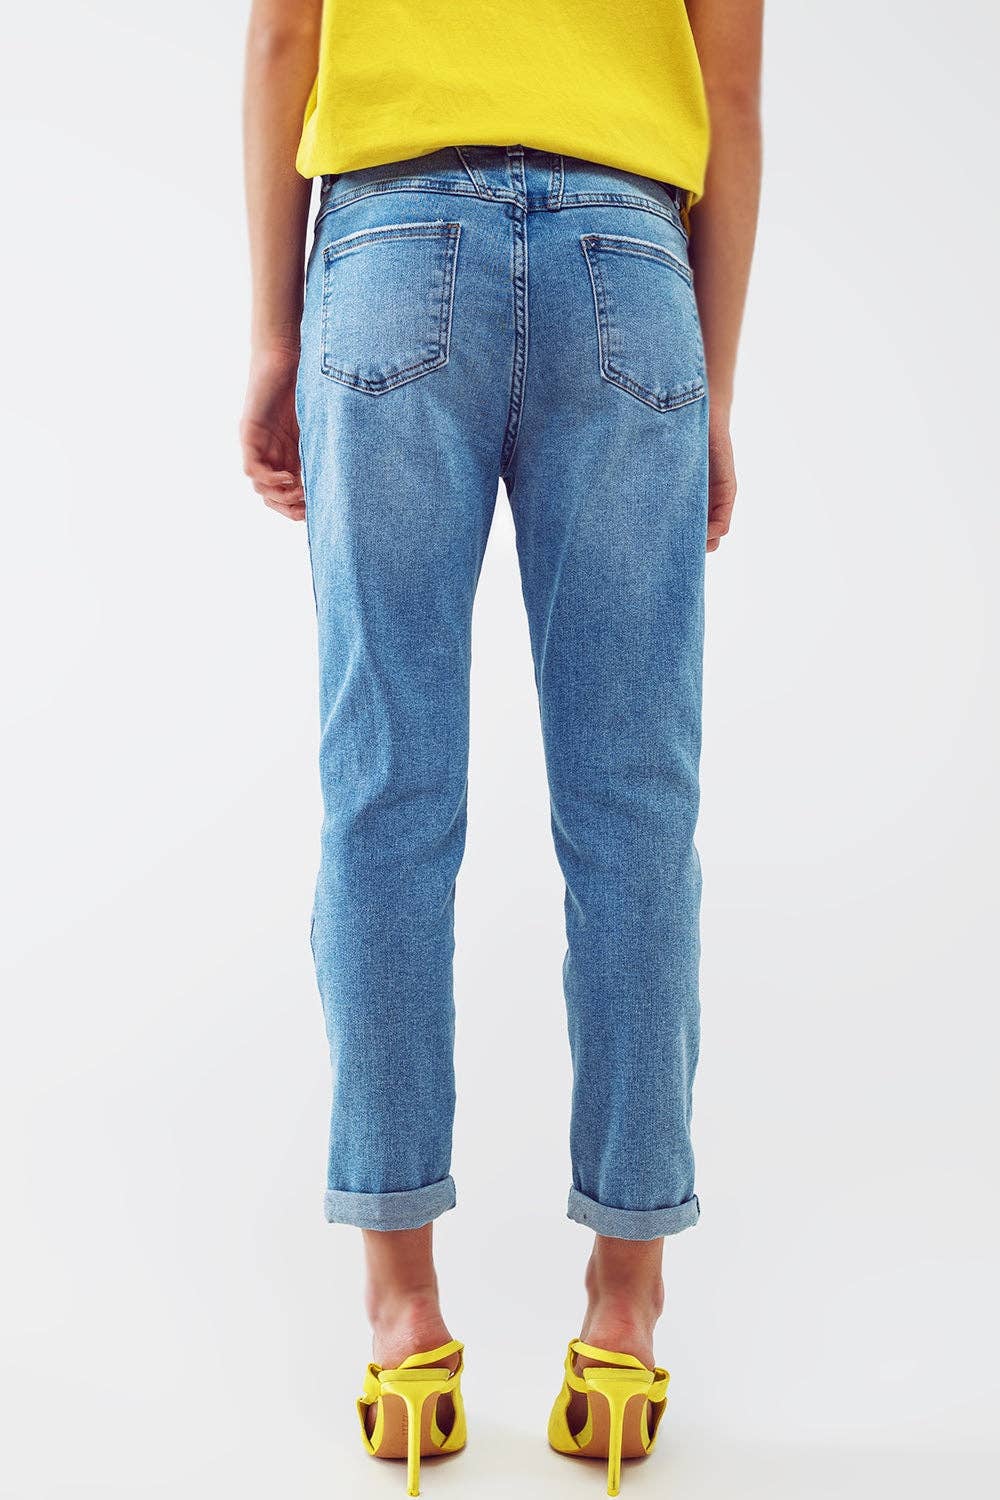 Distressed Regular Jeans in Light Blue Wash: Extra Small / Blue - Something about Sofia